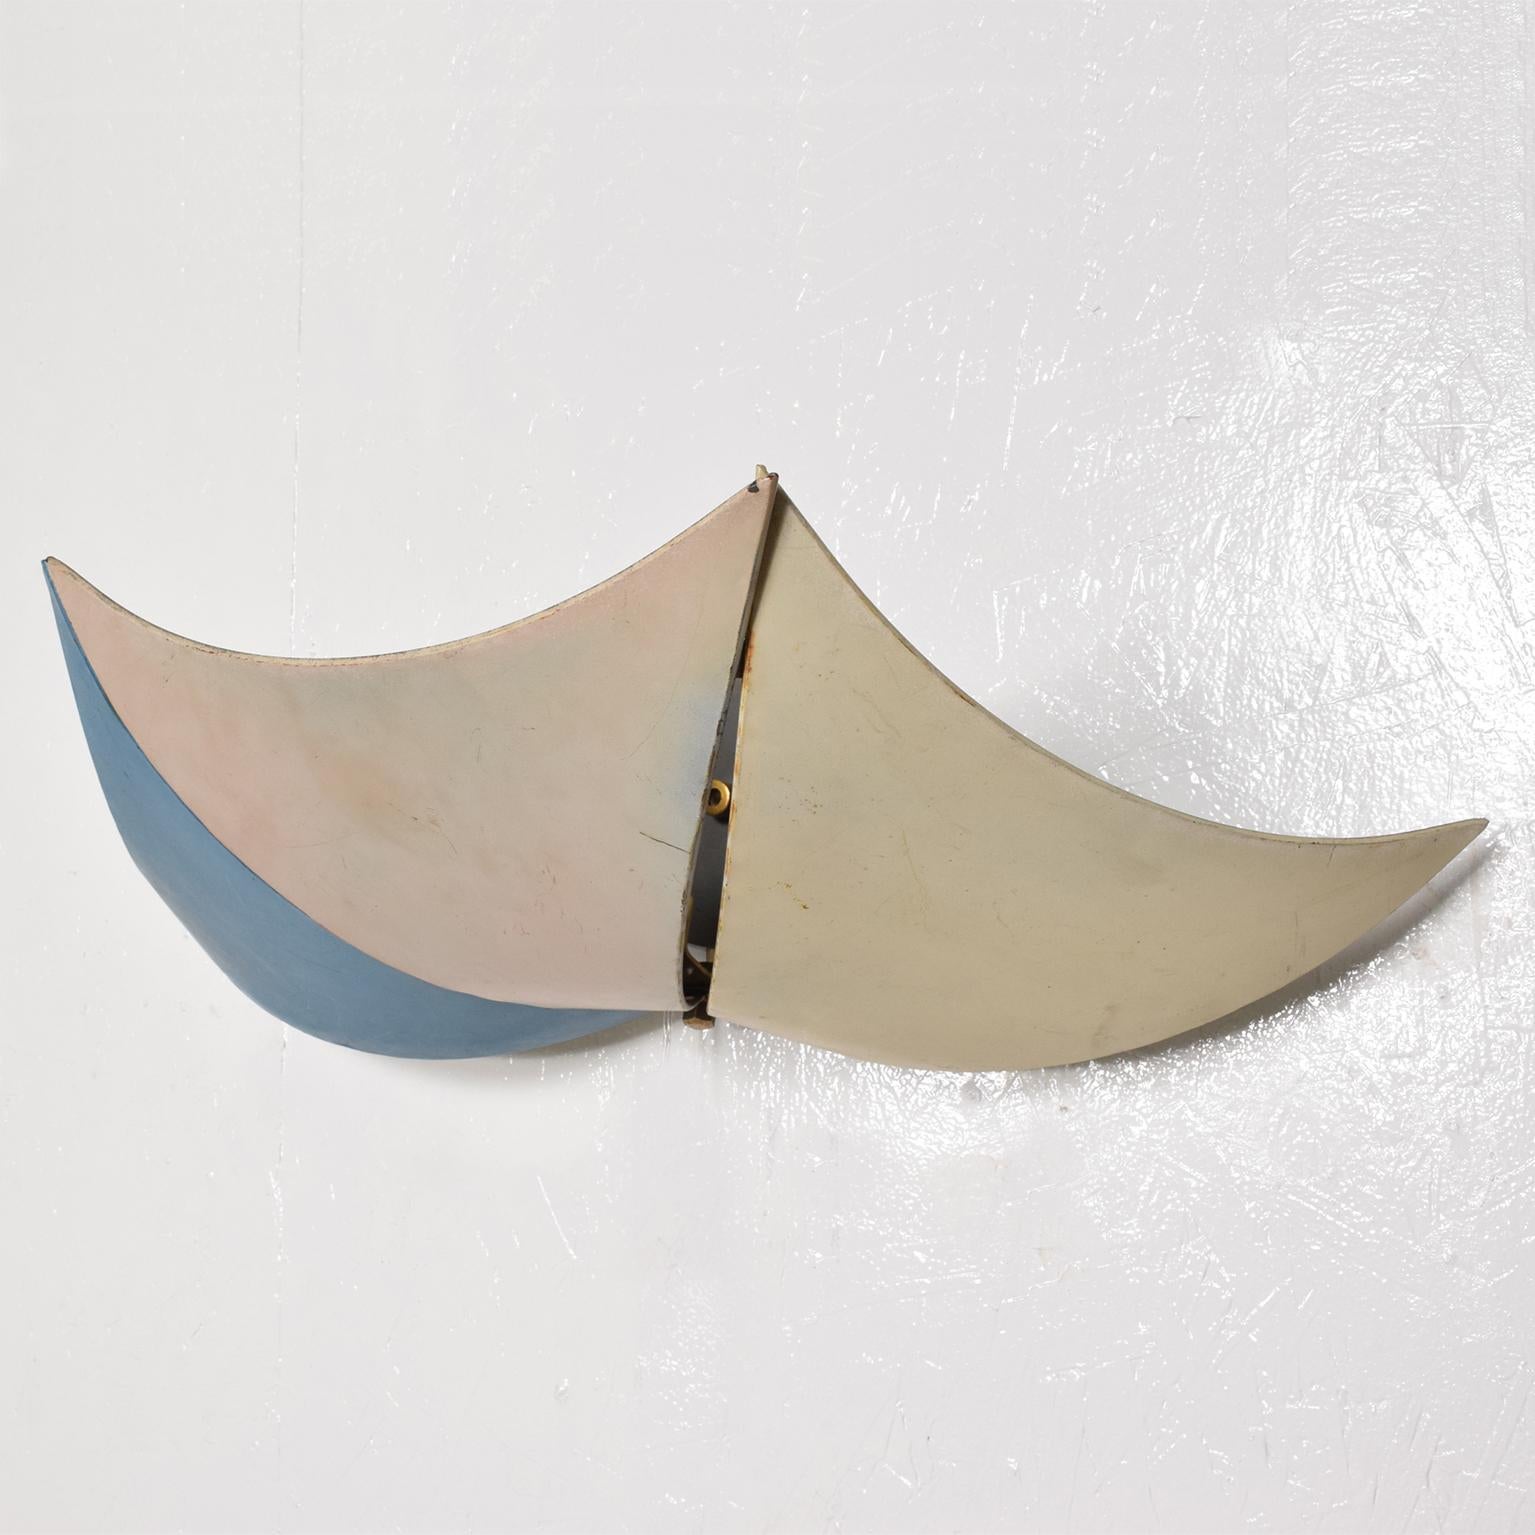 Mid-20th Century Mid-Century Modern Sculptural French Wall Sconce